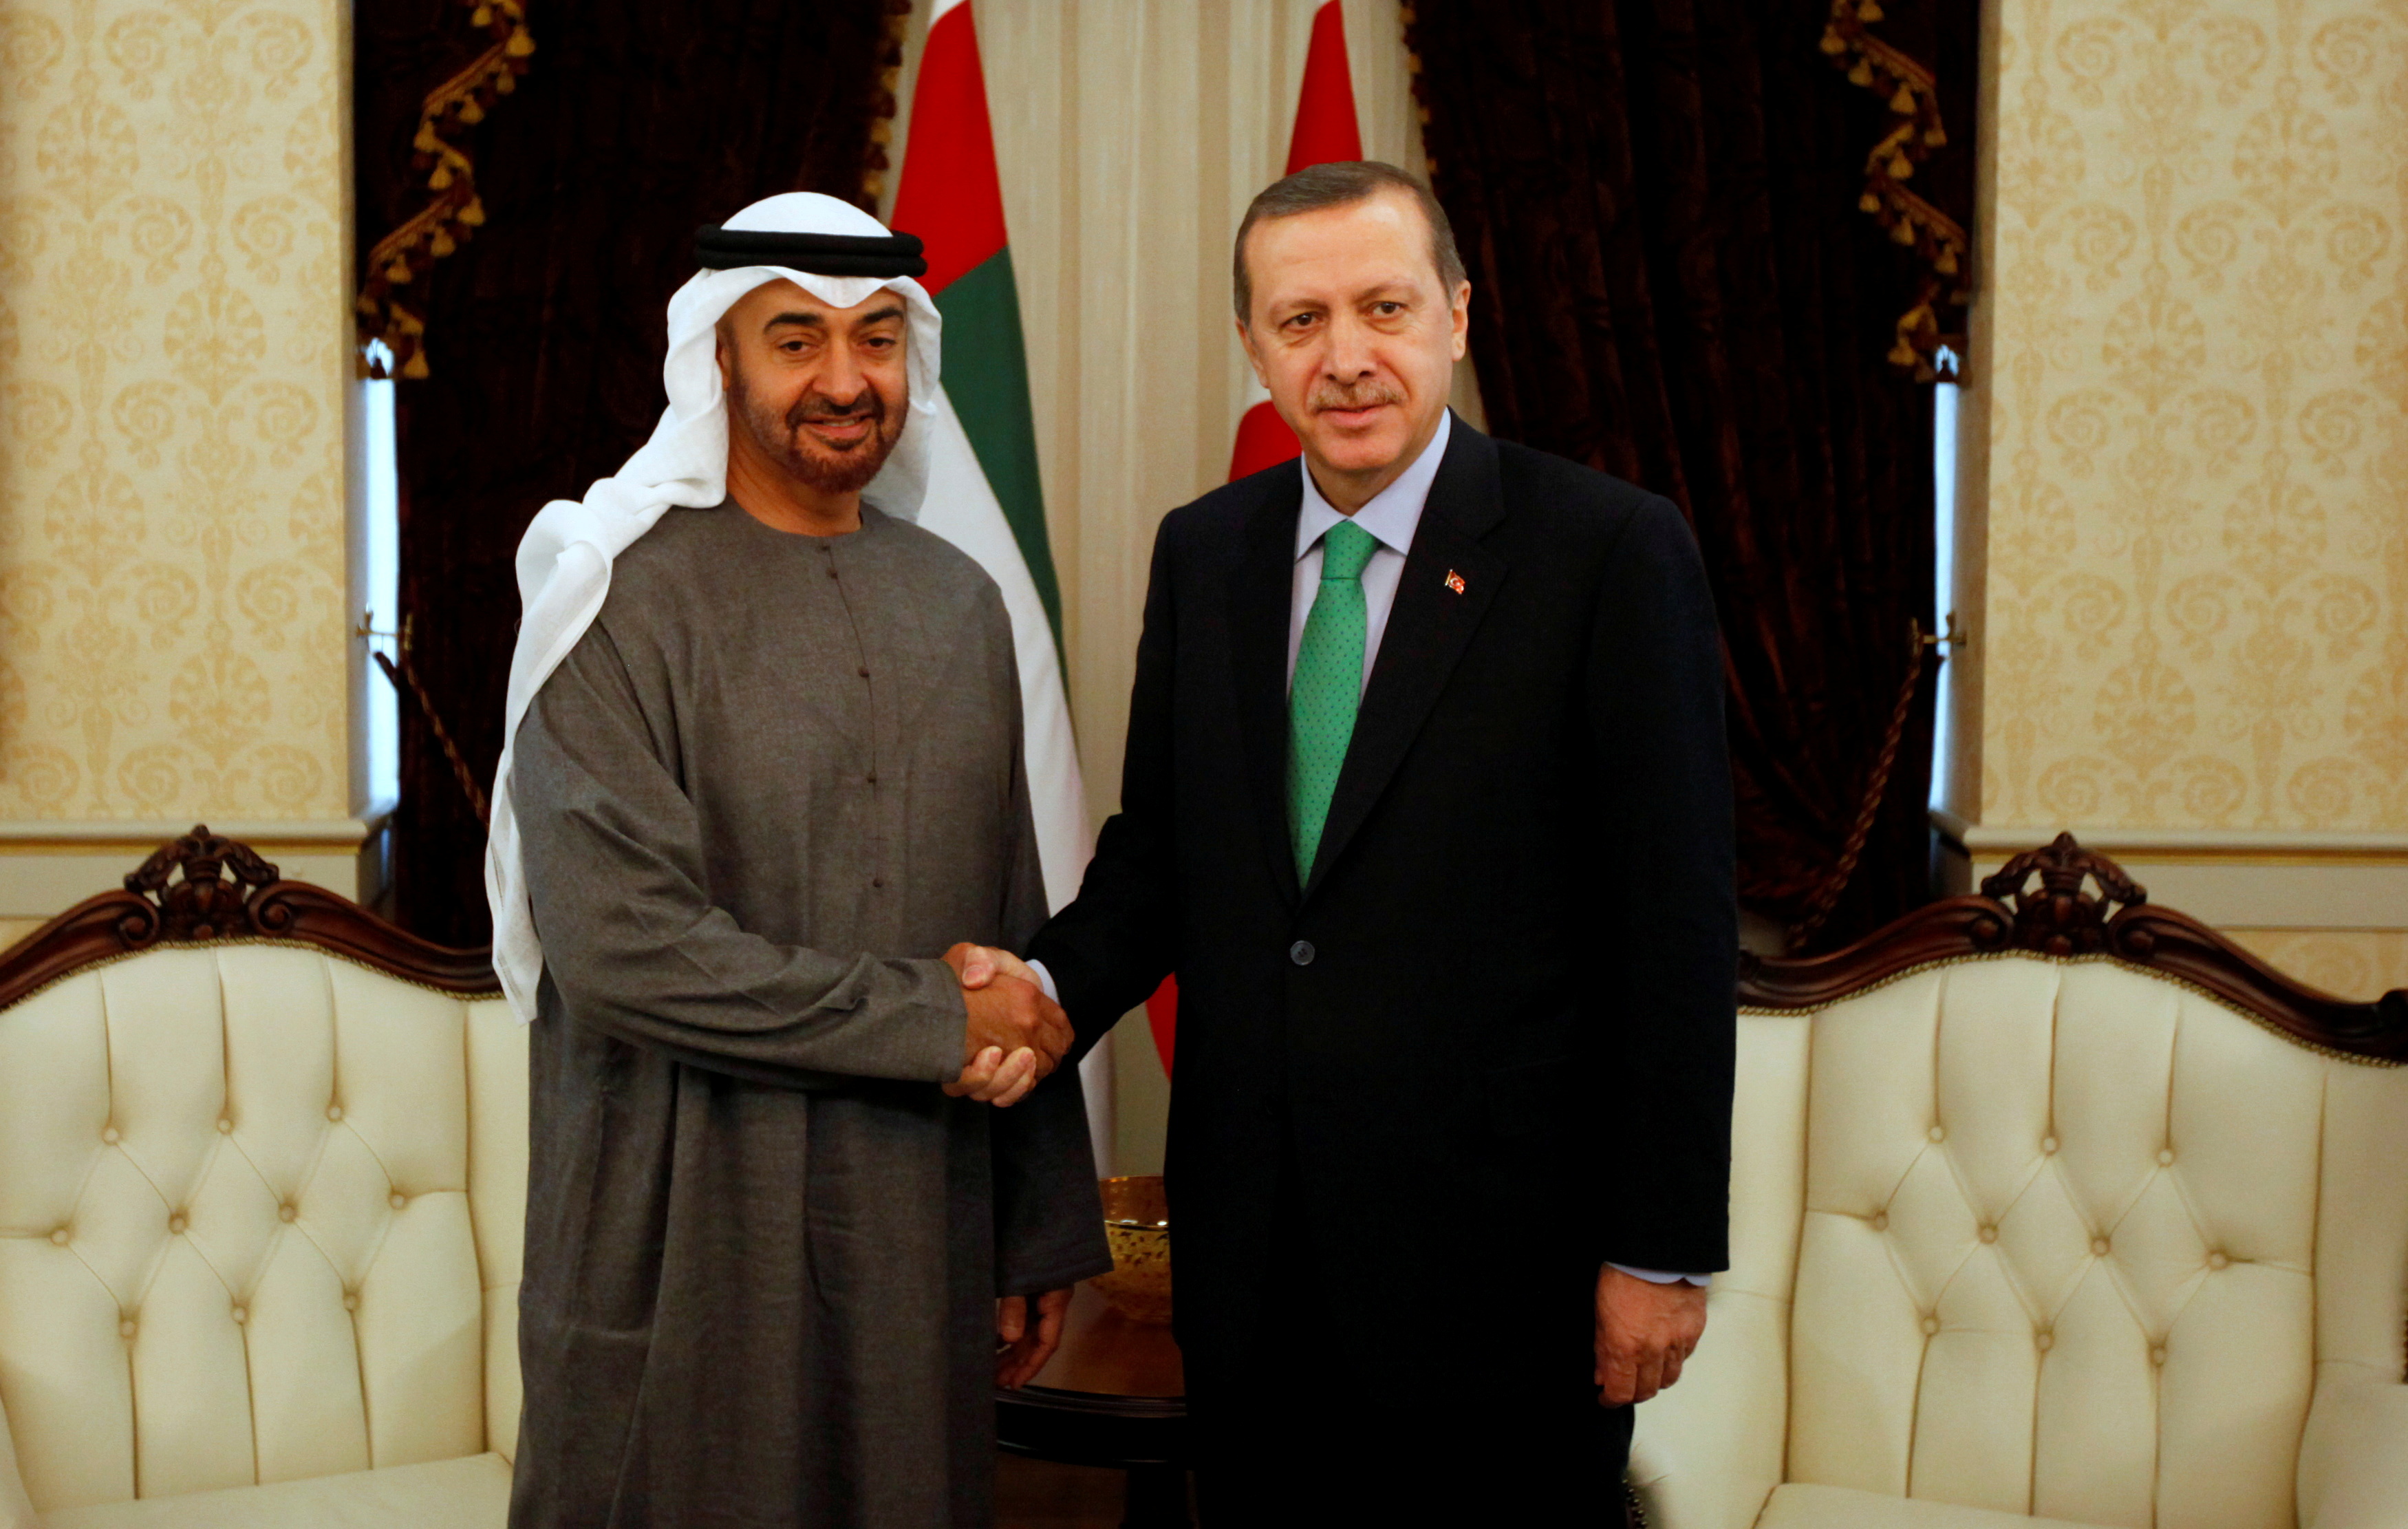 Abu Dhabi's Crown Prince Sheikh Mohammed shakes hands with Turkey's PM Erdogan before a 2012 meeting in Ankara